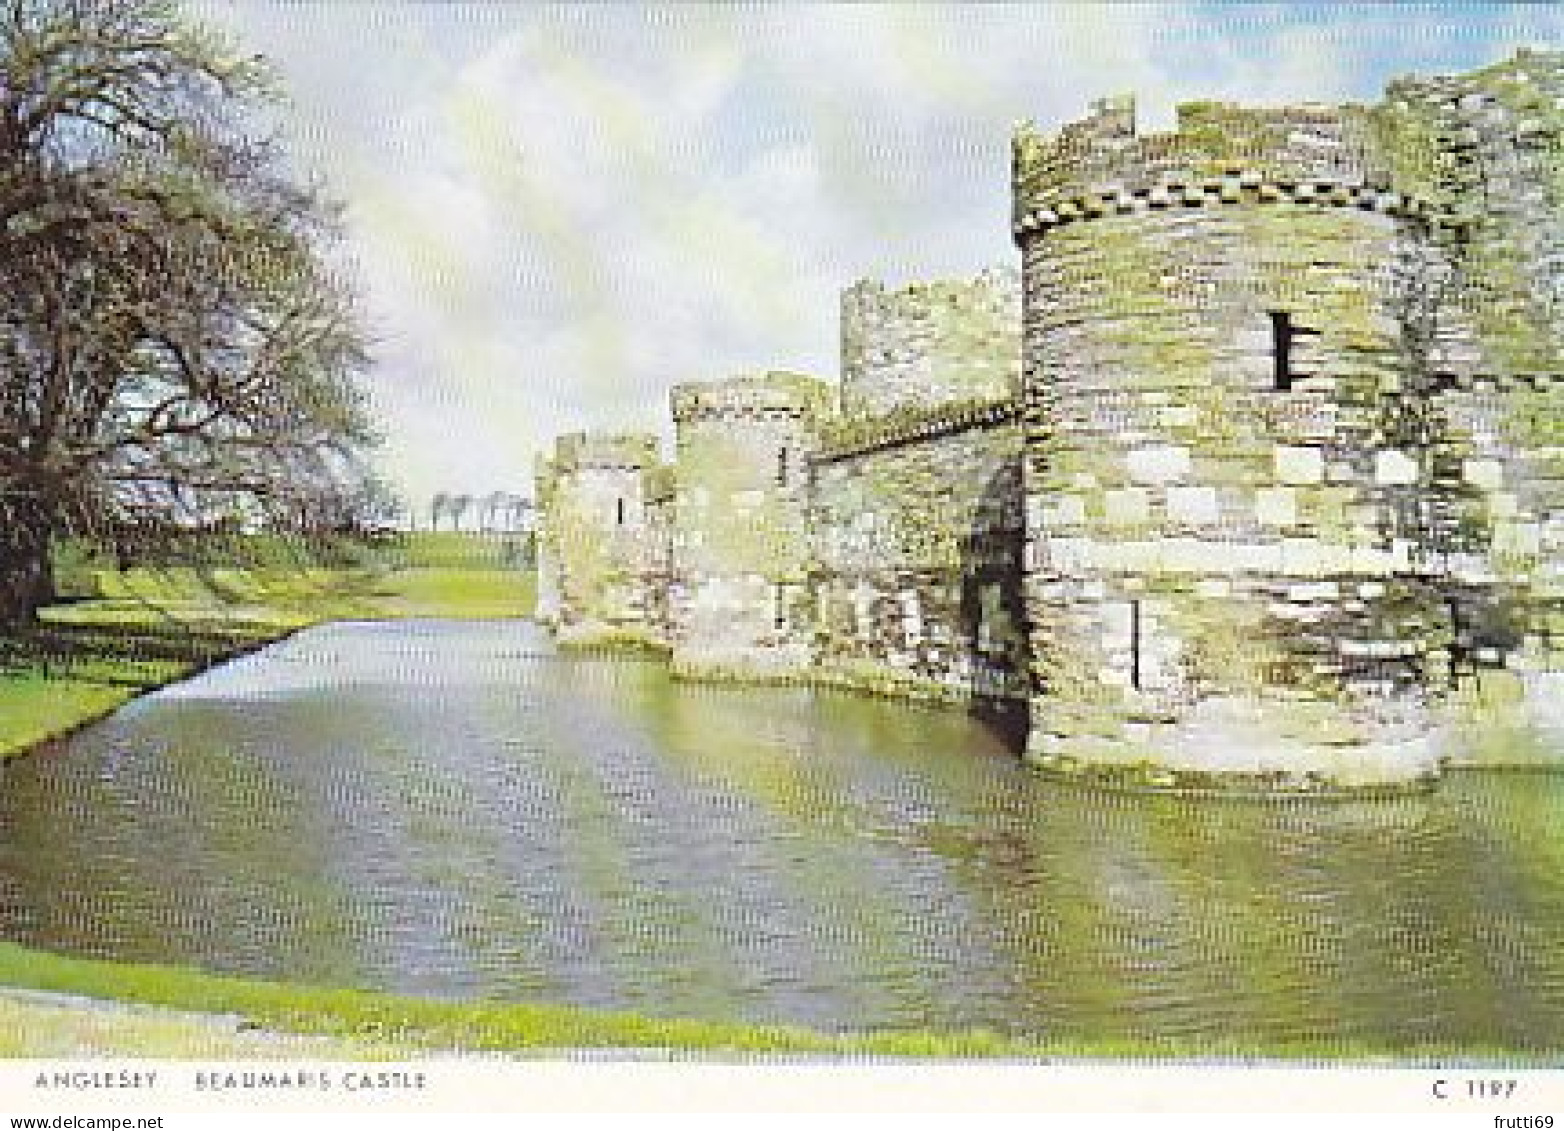 AK 173748 WALES - Anglesey - Beaumaris Castle - Anglesey